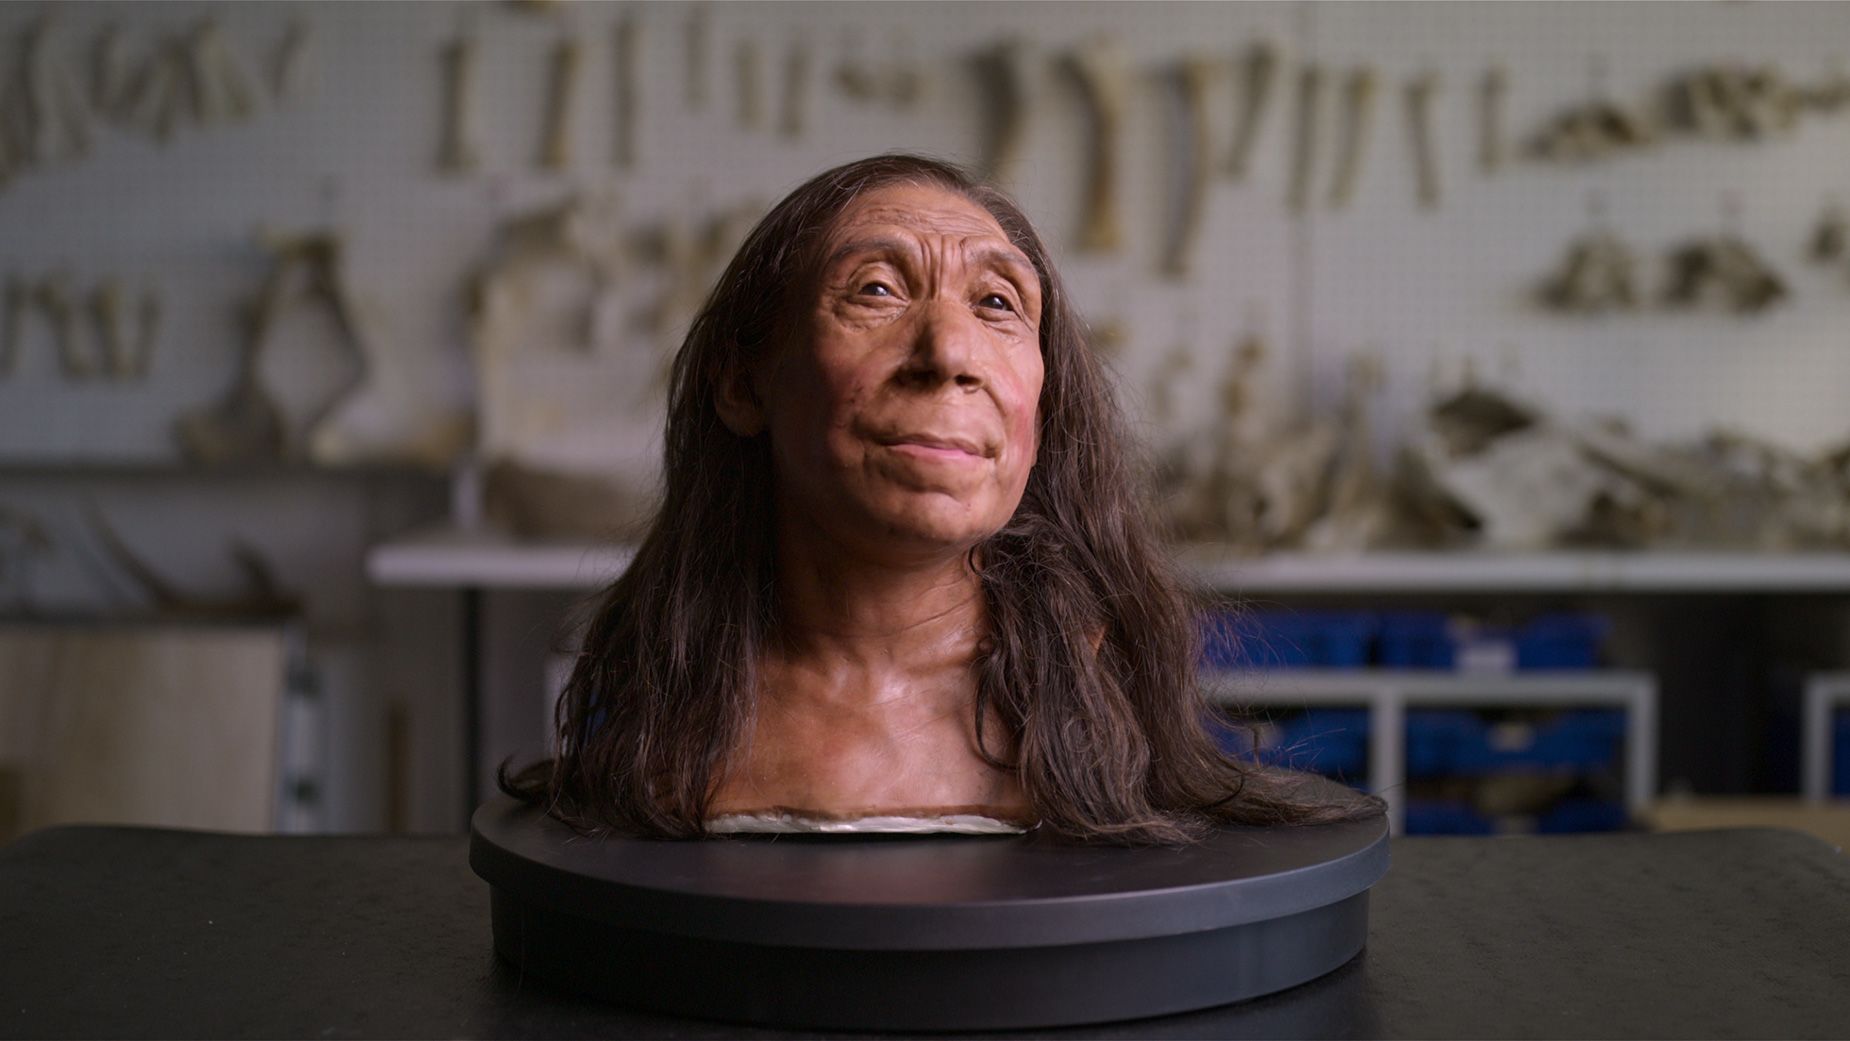 Researchers recreated the face of a Neanderthal woman, who would have been in her mid-40s when she died 75,000 years ago.